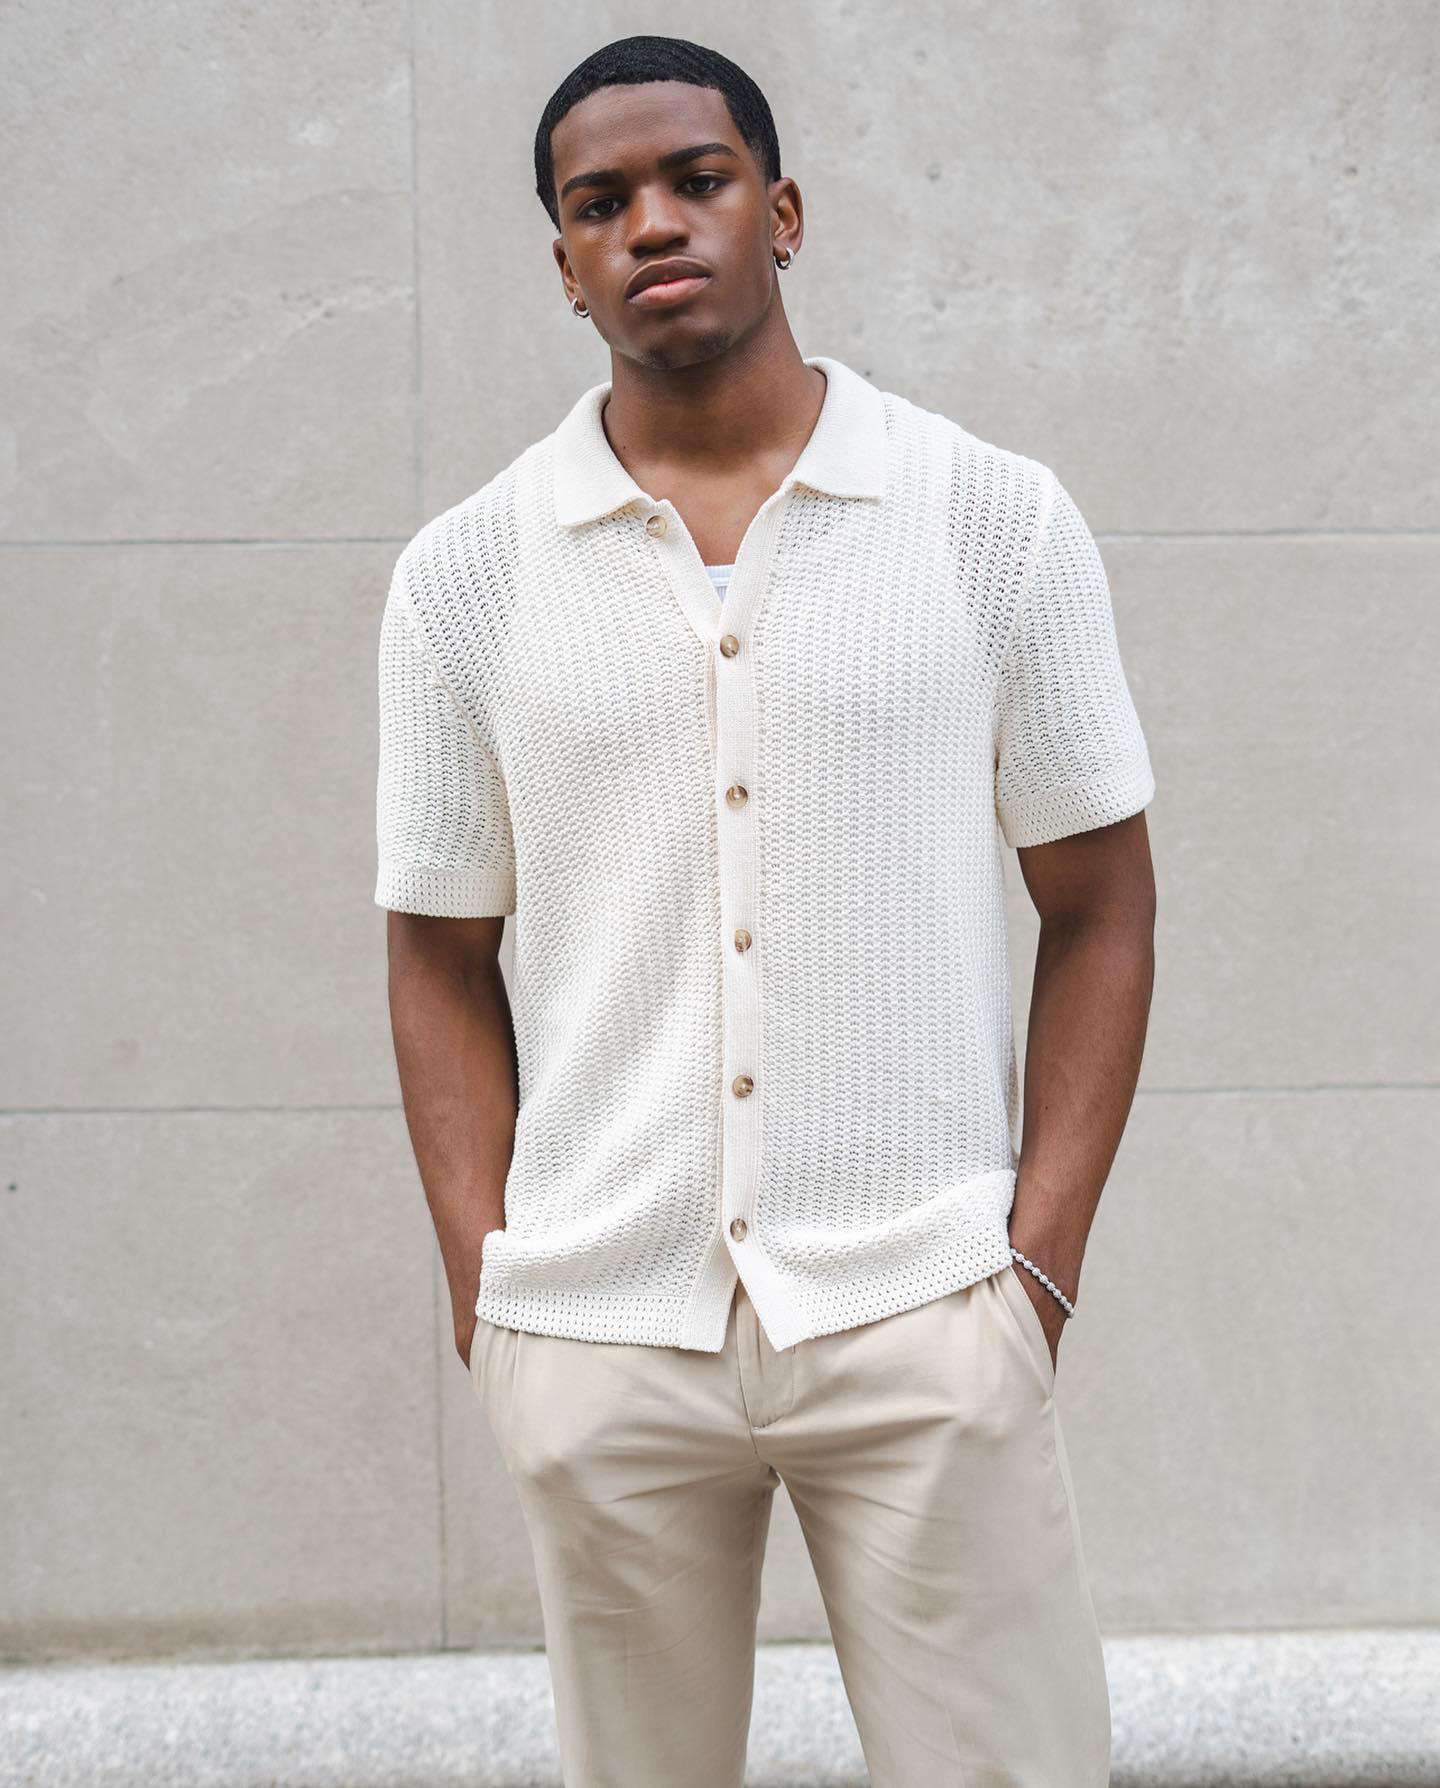 Layton Lamell - Swish crochet shirts for the summer time breezes